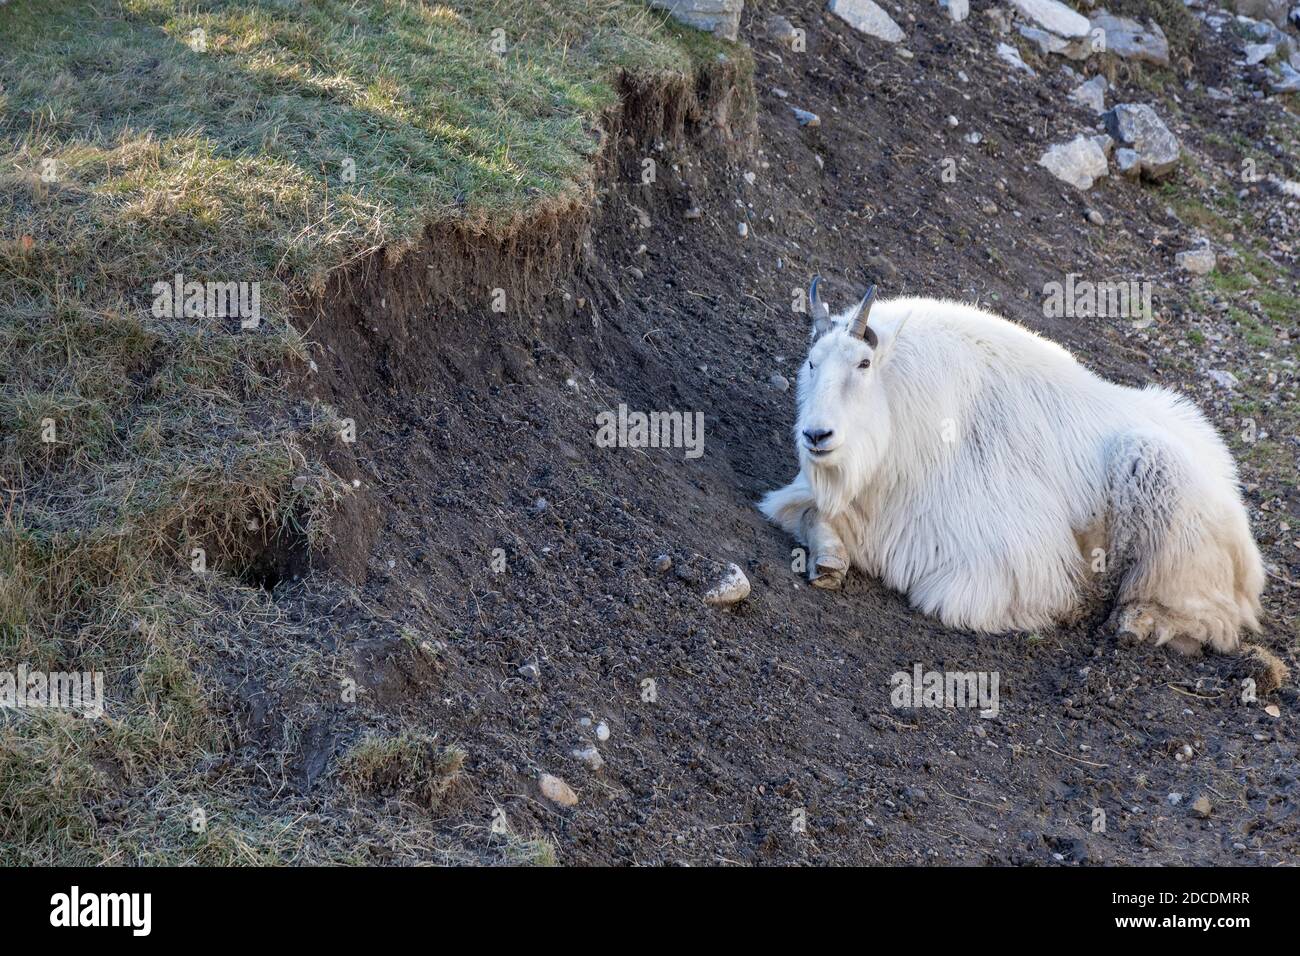 The mountain goat, also known as the Rocky Mountain goat, is a hoofed mammal endemic to North America. Scientific name Oreamnos americanus Stock Photo